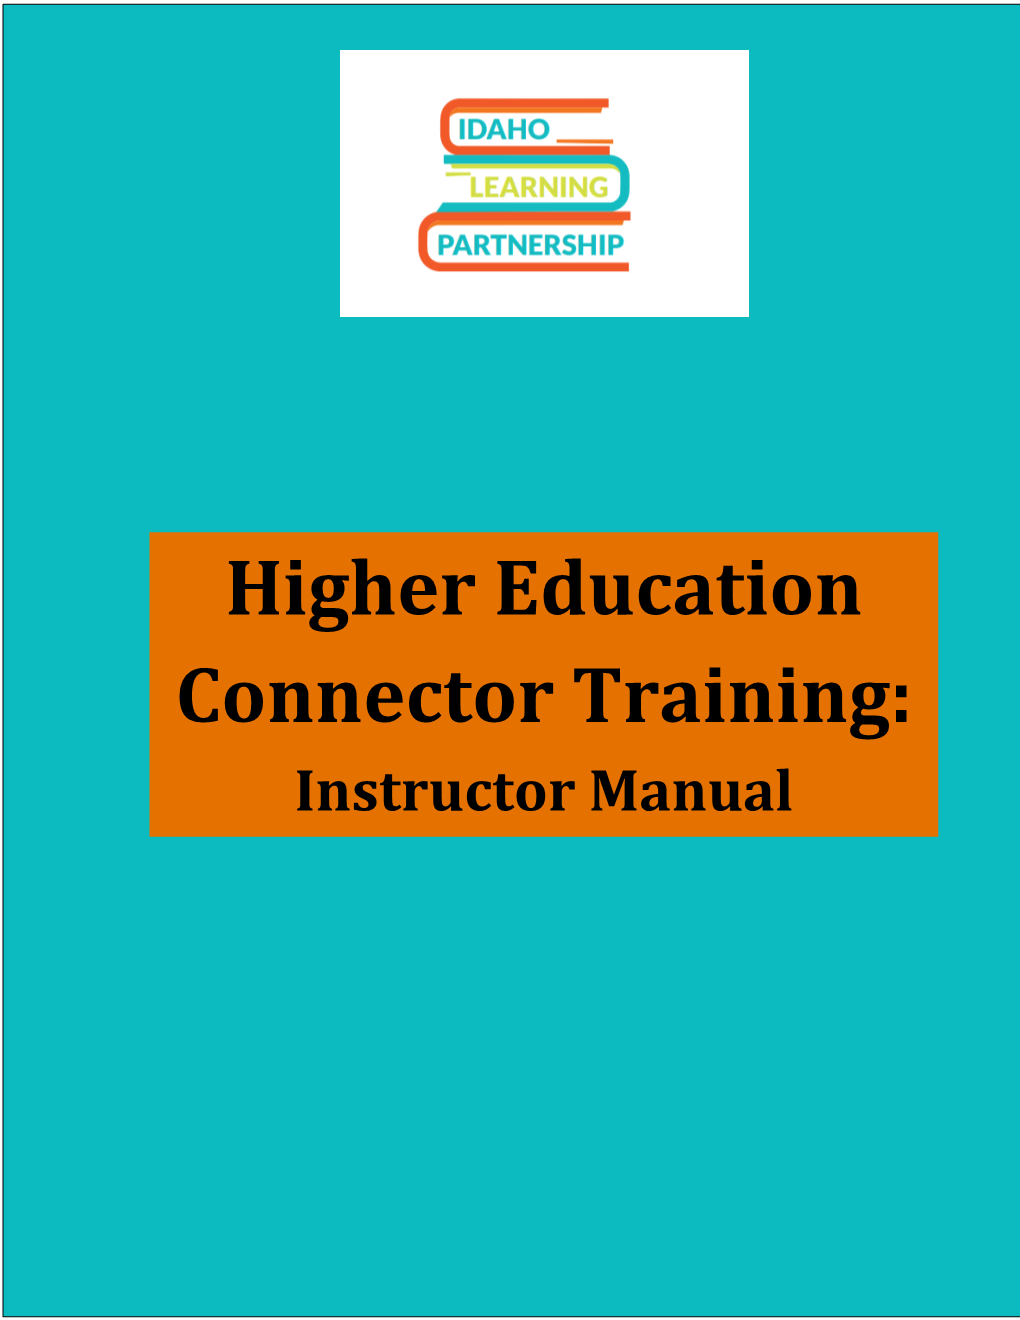 Higher Education Connector Training